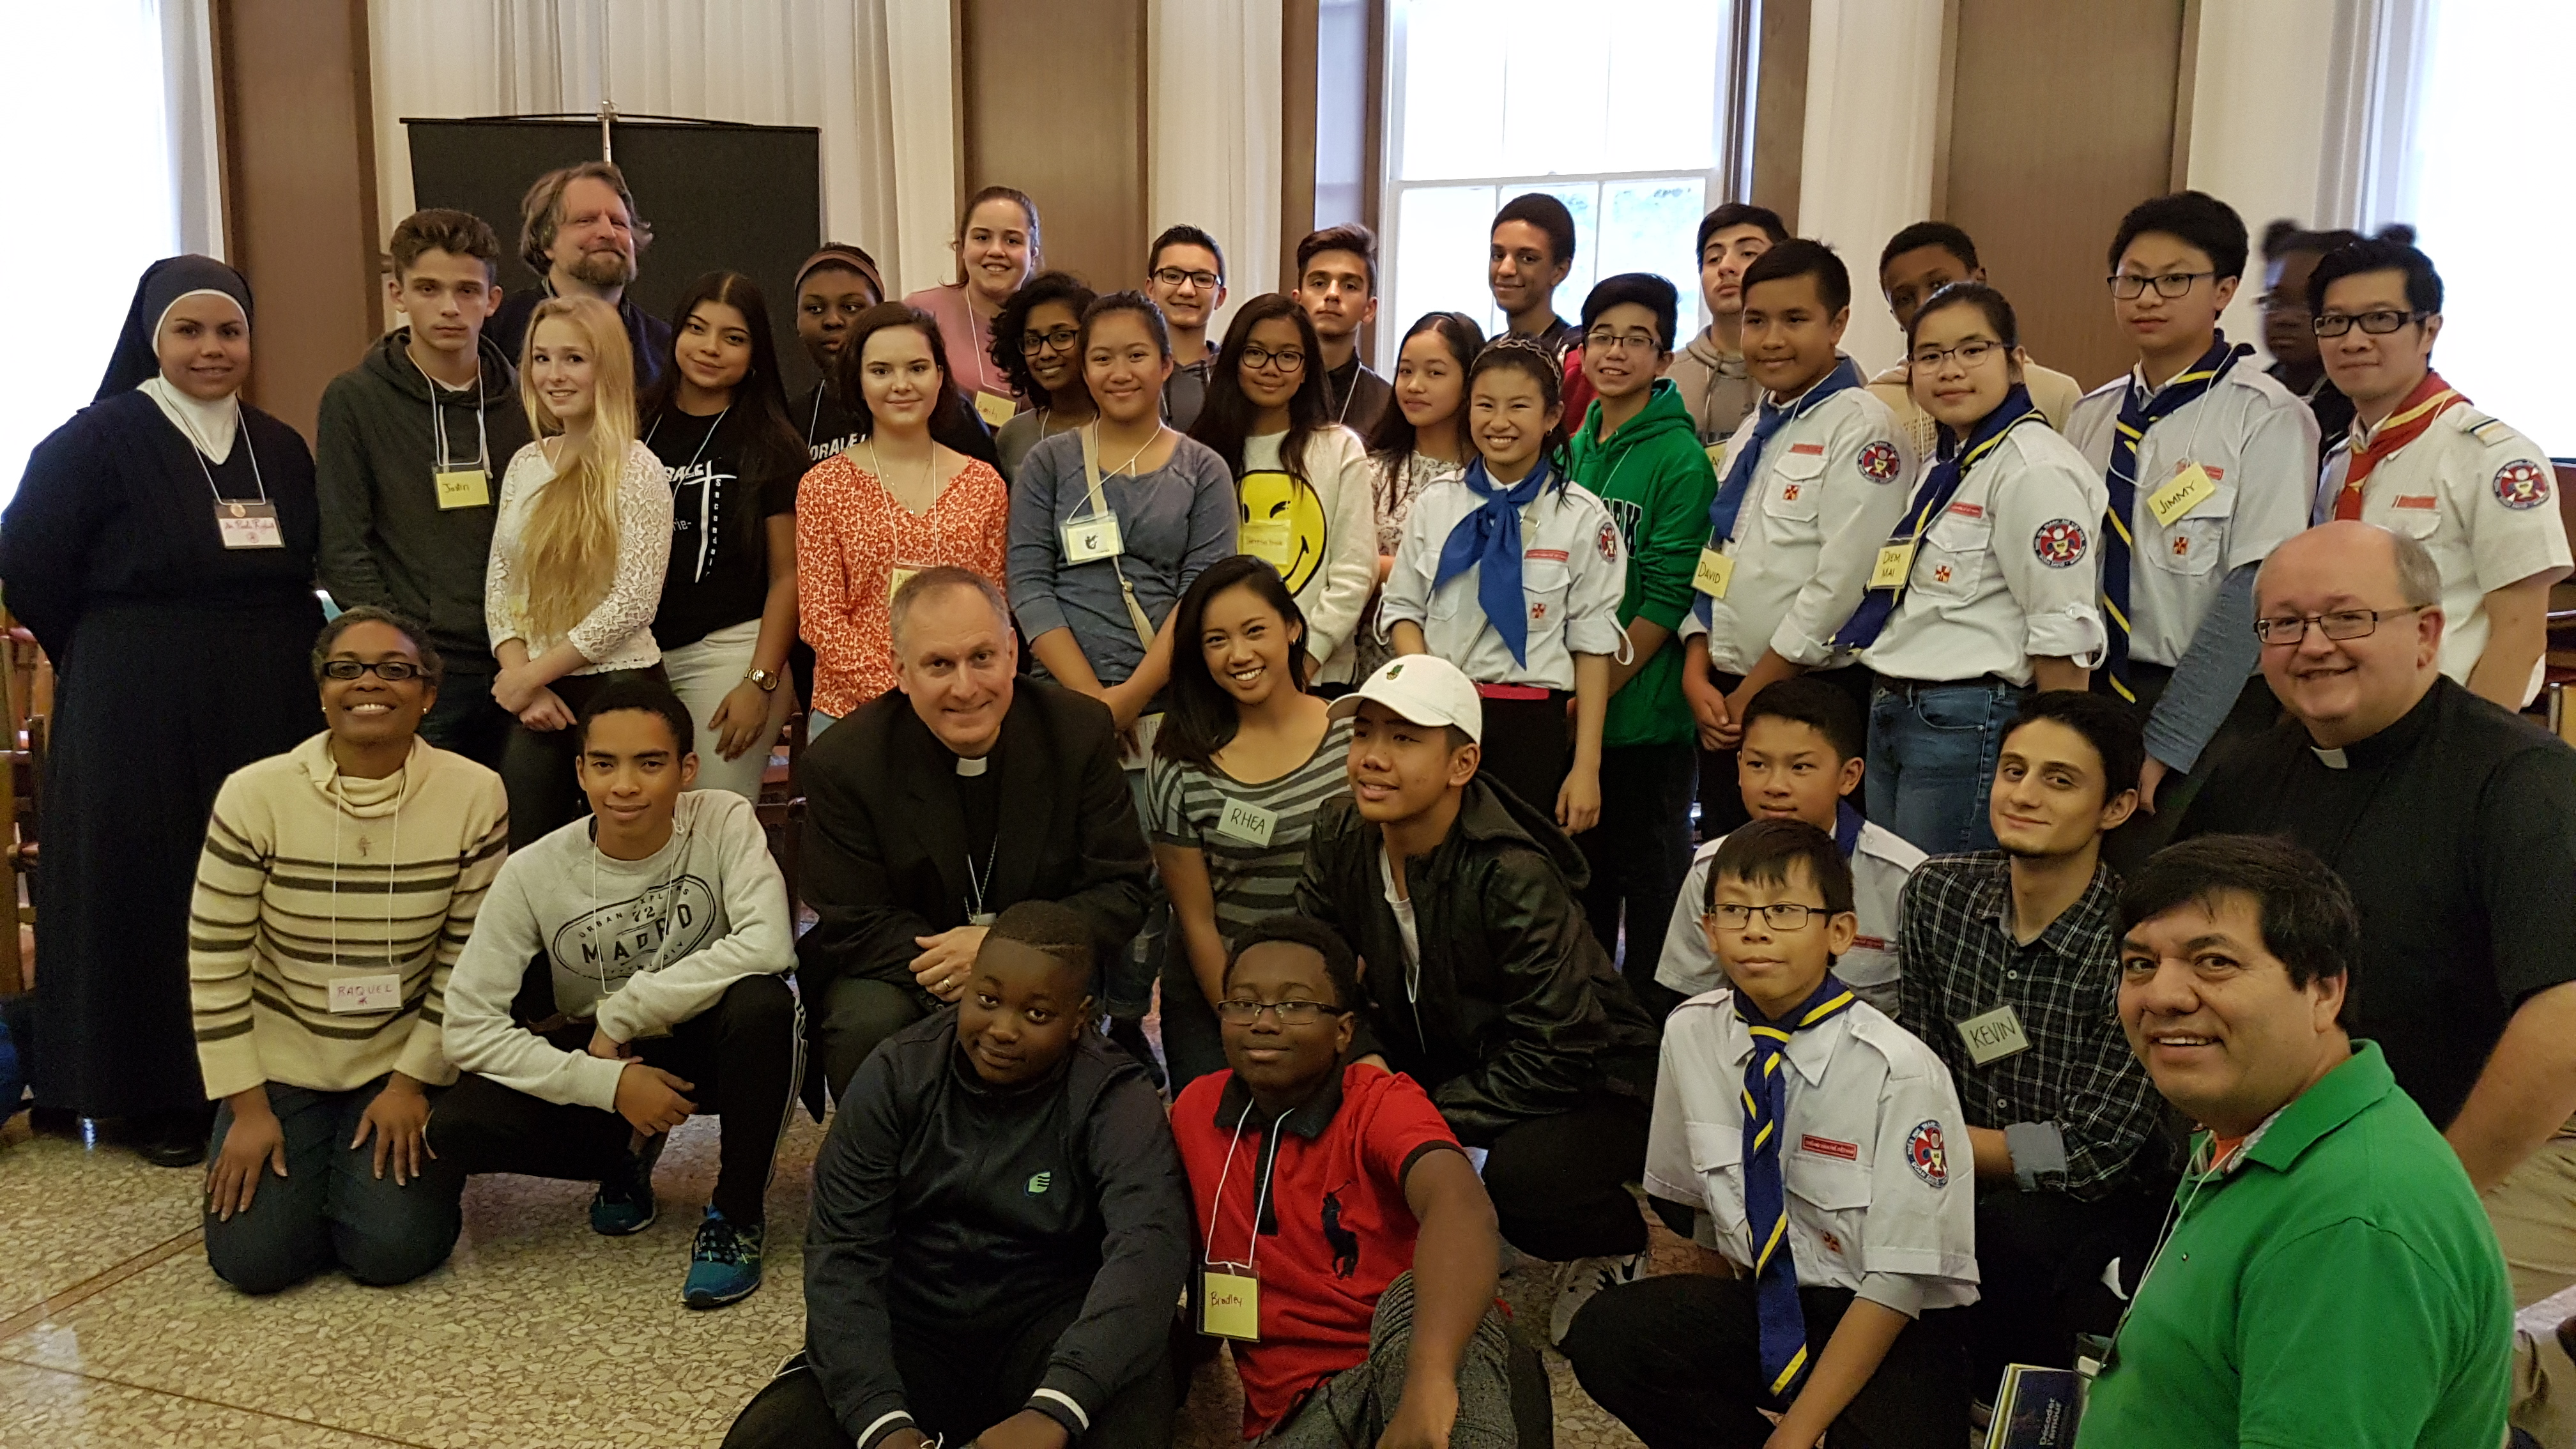 Young people gathered for the Youth Forum held at the Grand Séminaire de Montréal